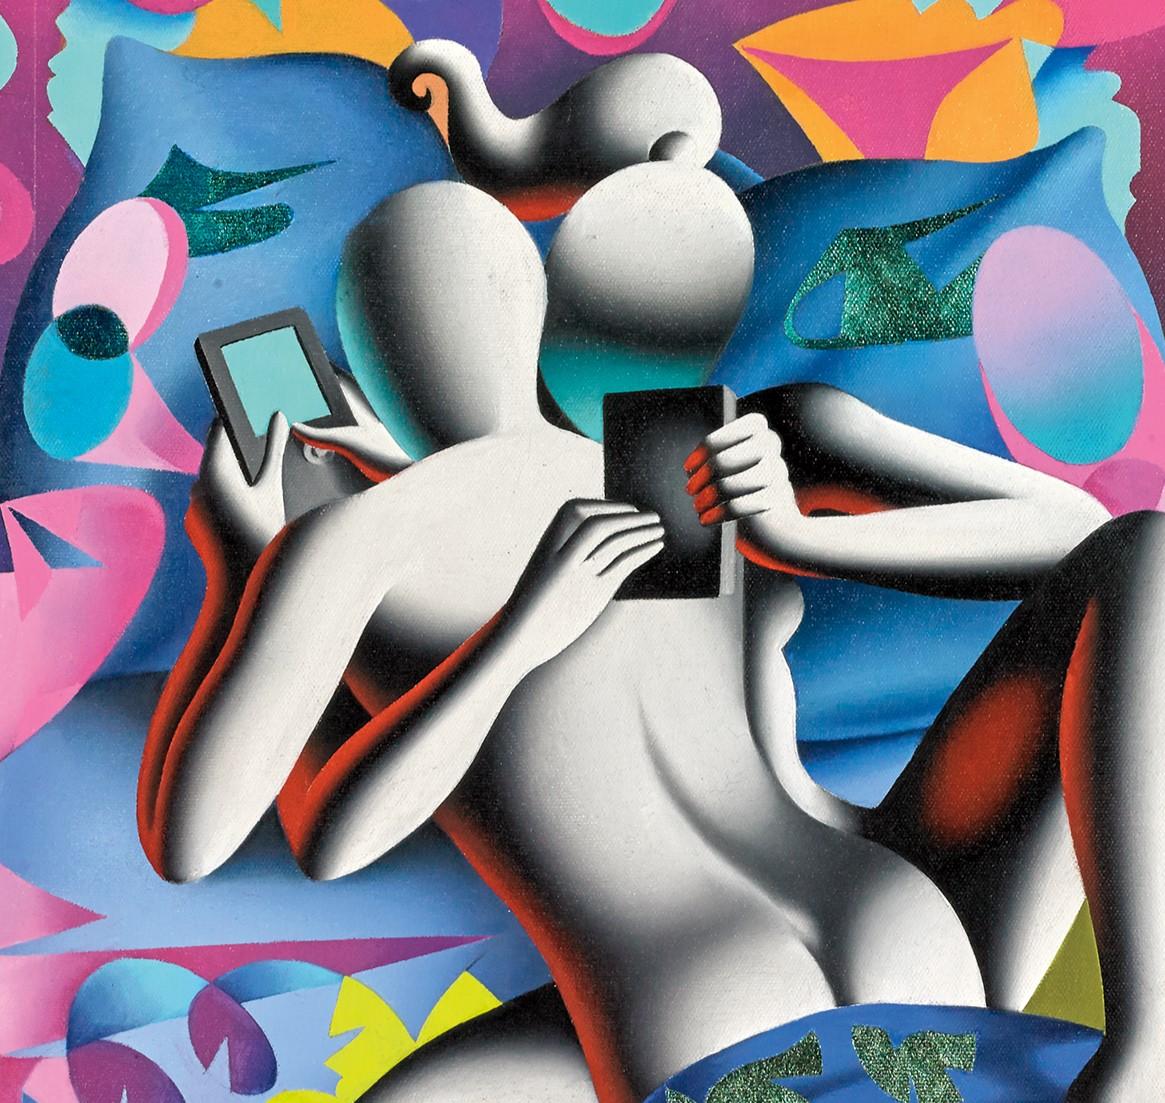 Sexting (Beyond the Emoji) is an oil on canvas painting, 24 x 17.75 inches, signed and dated 'KOSTABI 2015 - 2016' upper right. Framed in a contemporary black frame.
